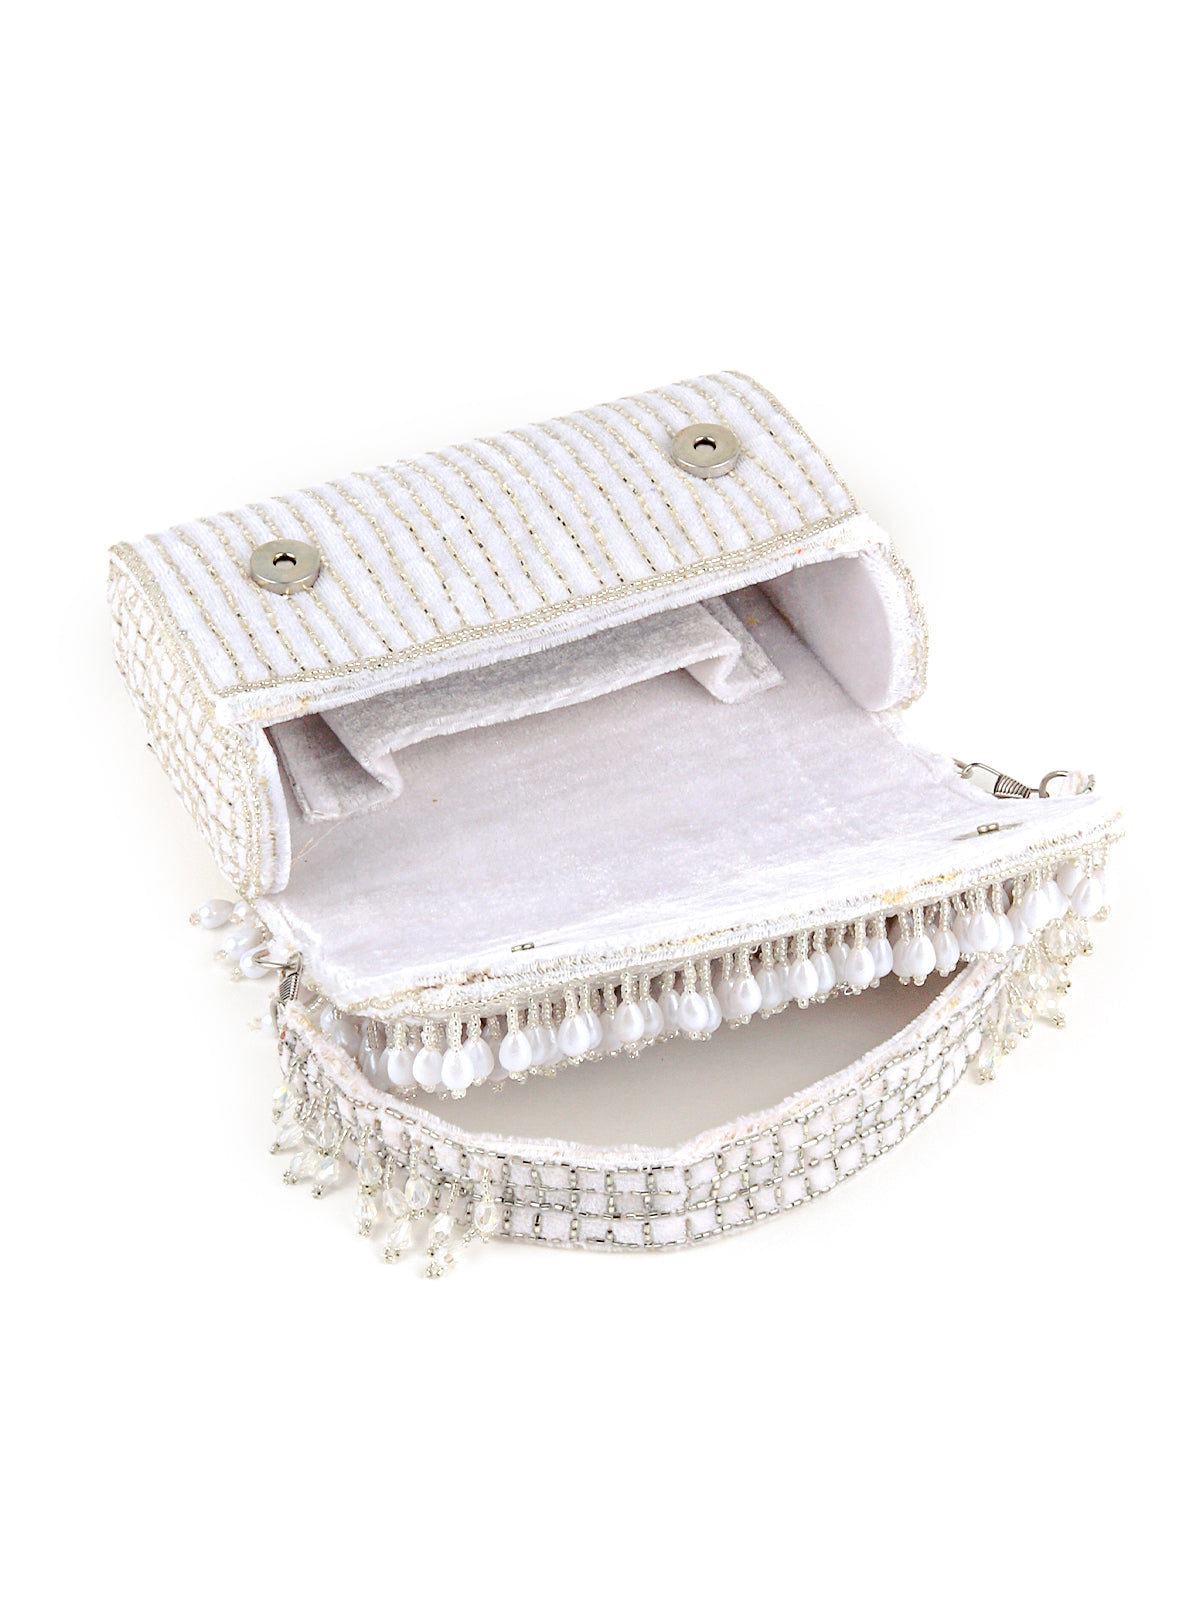 Exquisite fully beaded oval-shaped sling bag